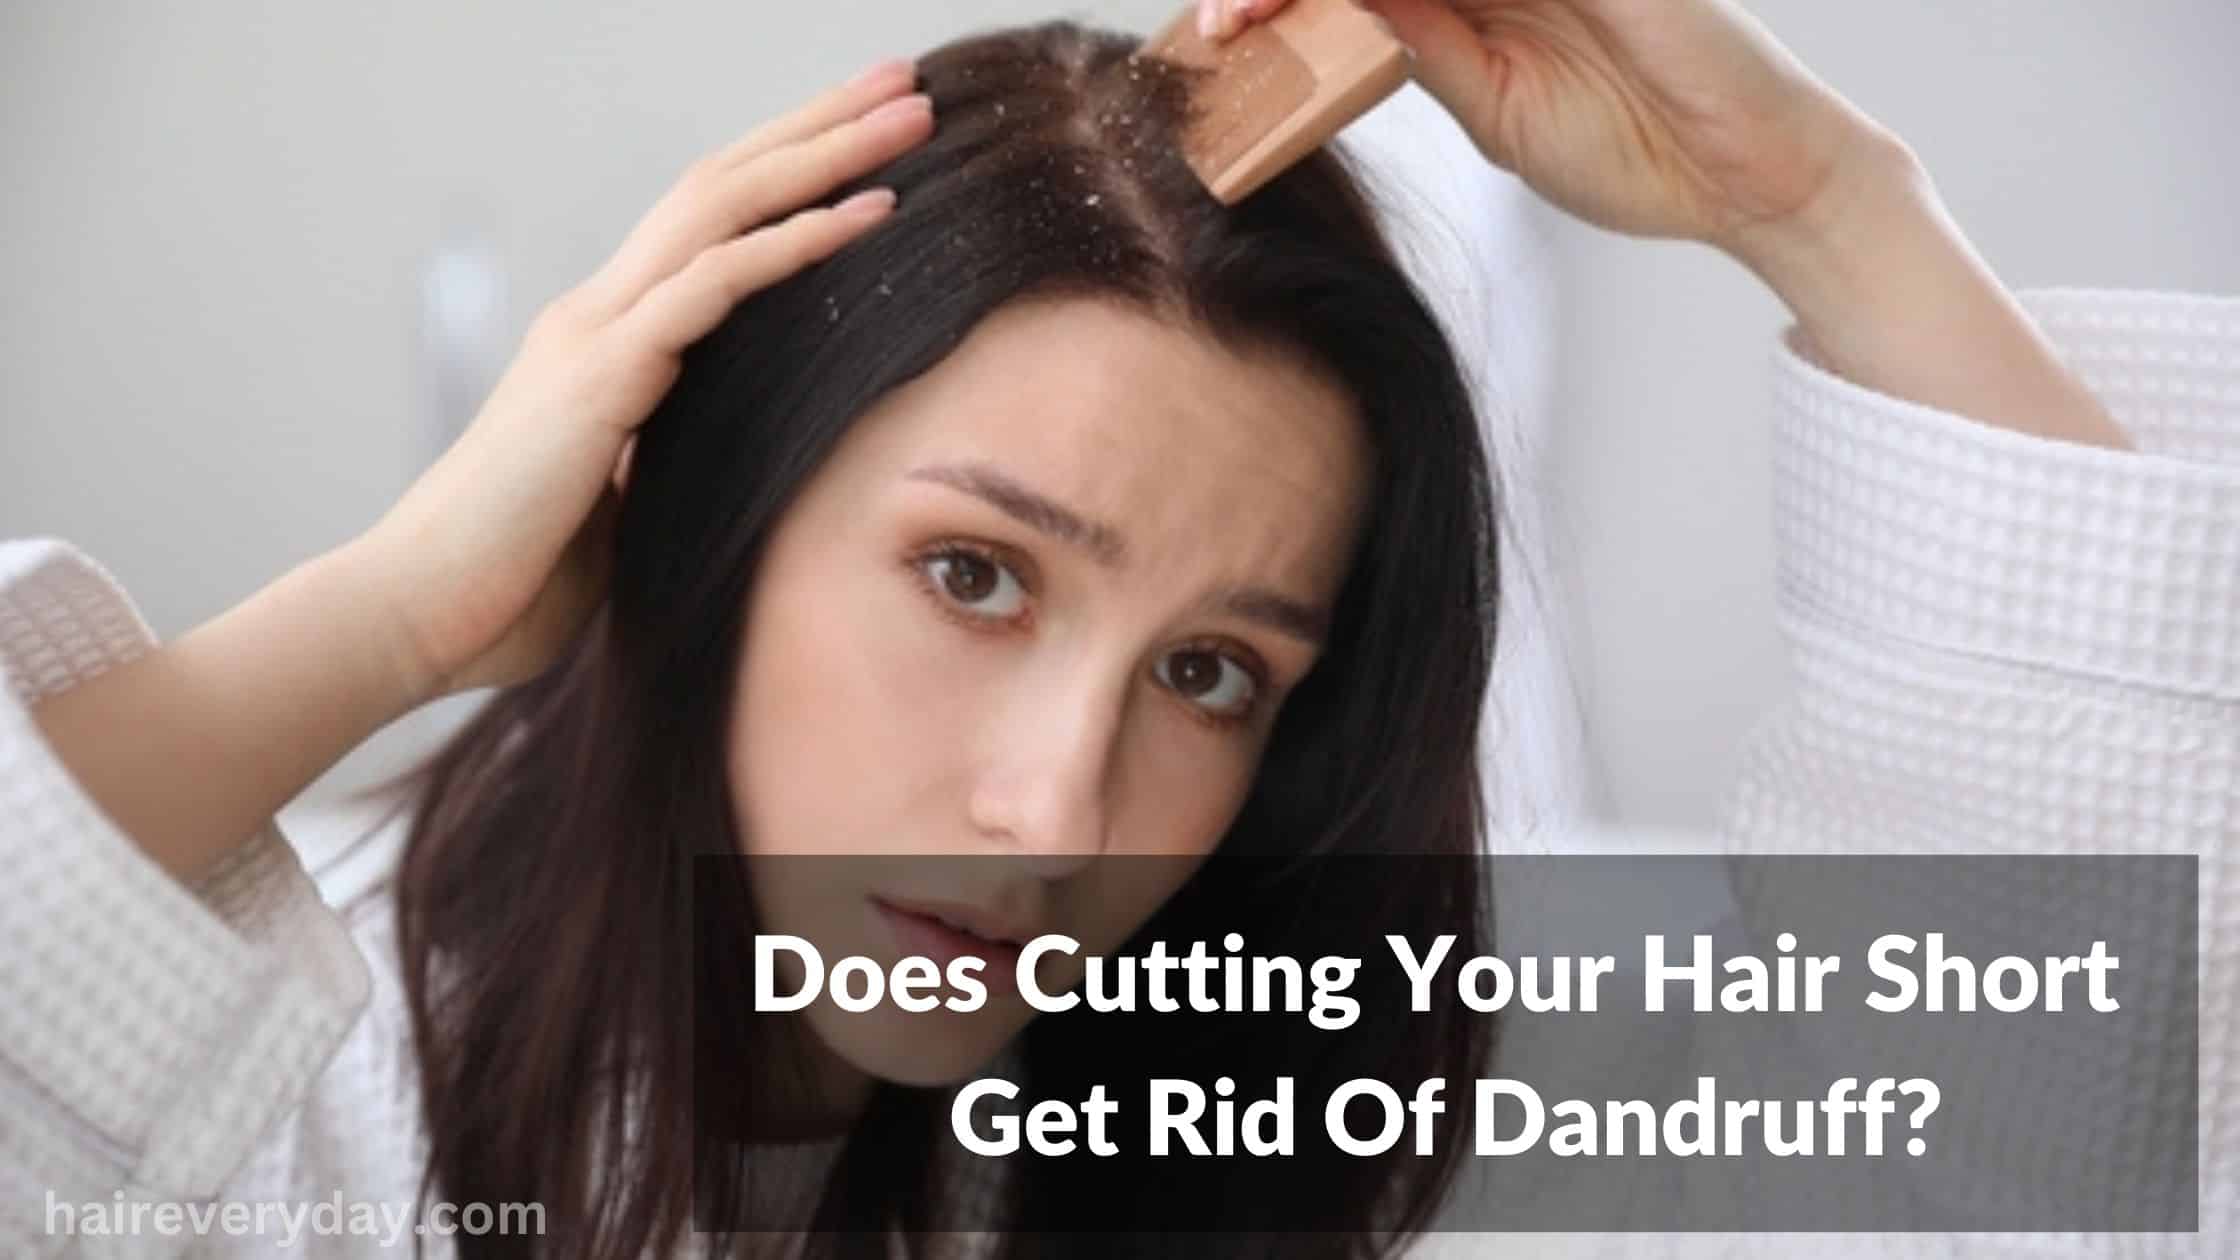 Are The White Flakes on Your Scalp Dandruff? | Think Twice